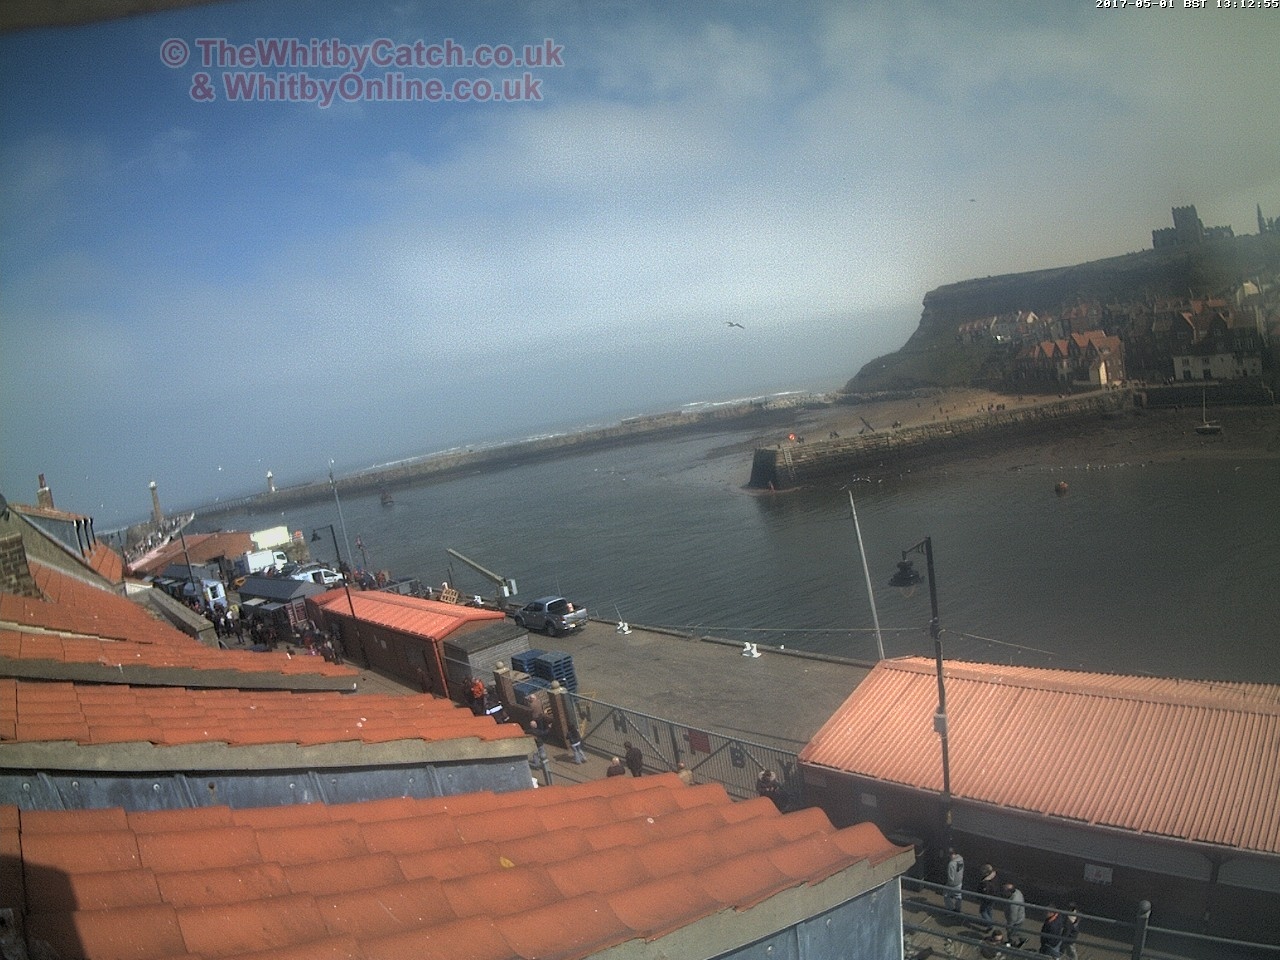 Whitby Mon 1st May 2017 13:13.